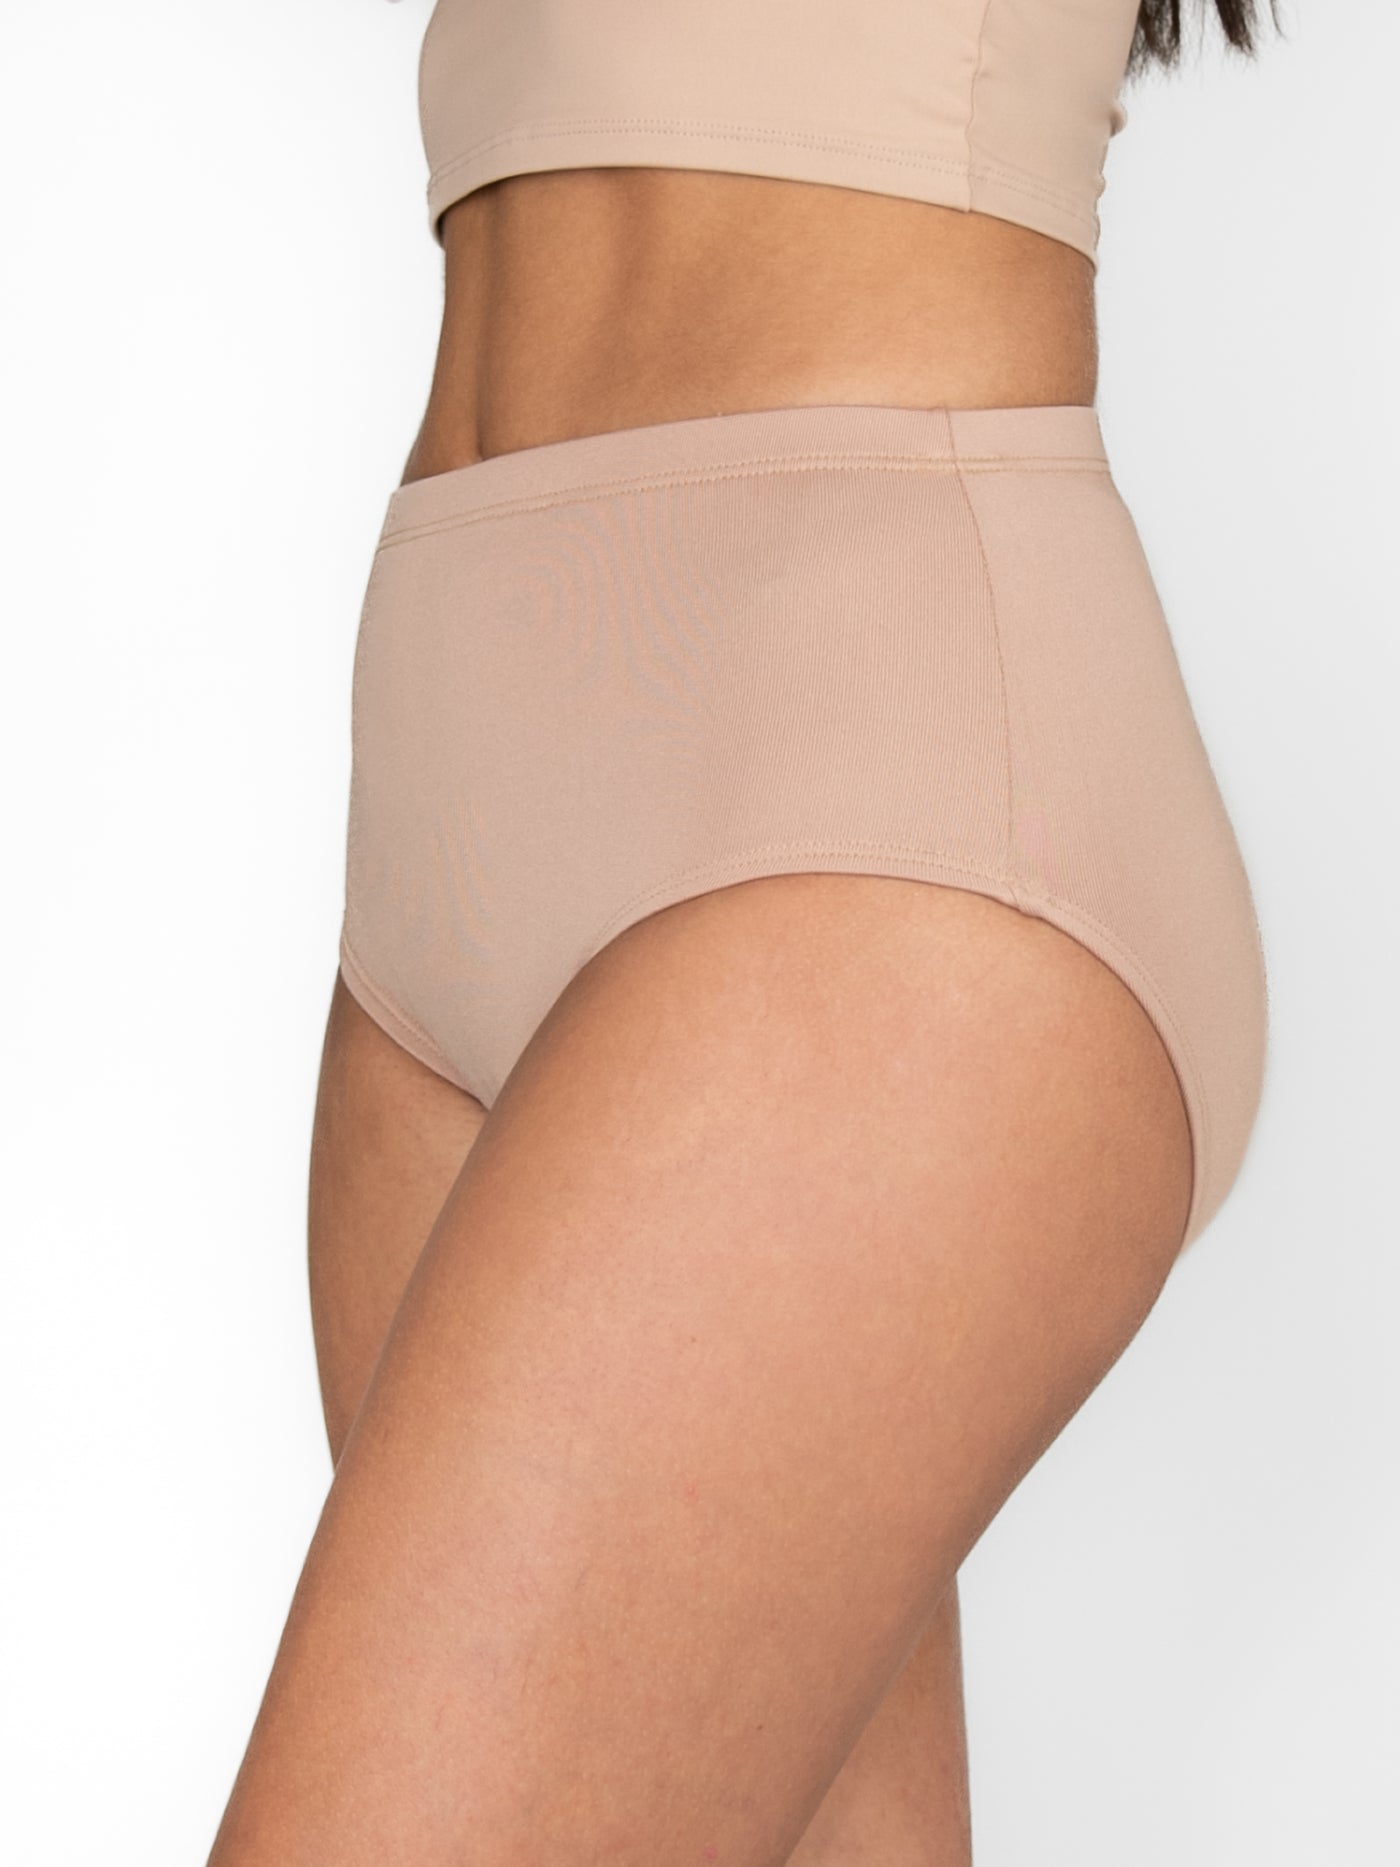 MicroTECH Athletic Brief - GIRLS